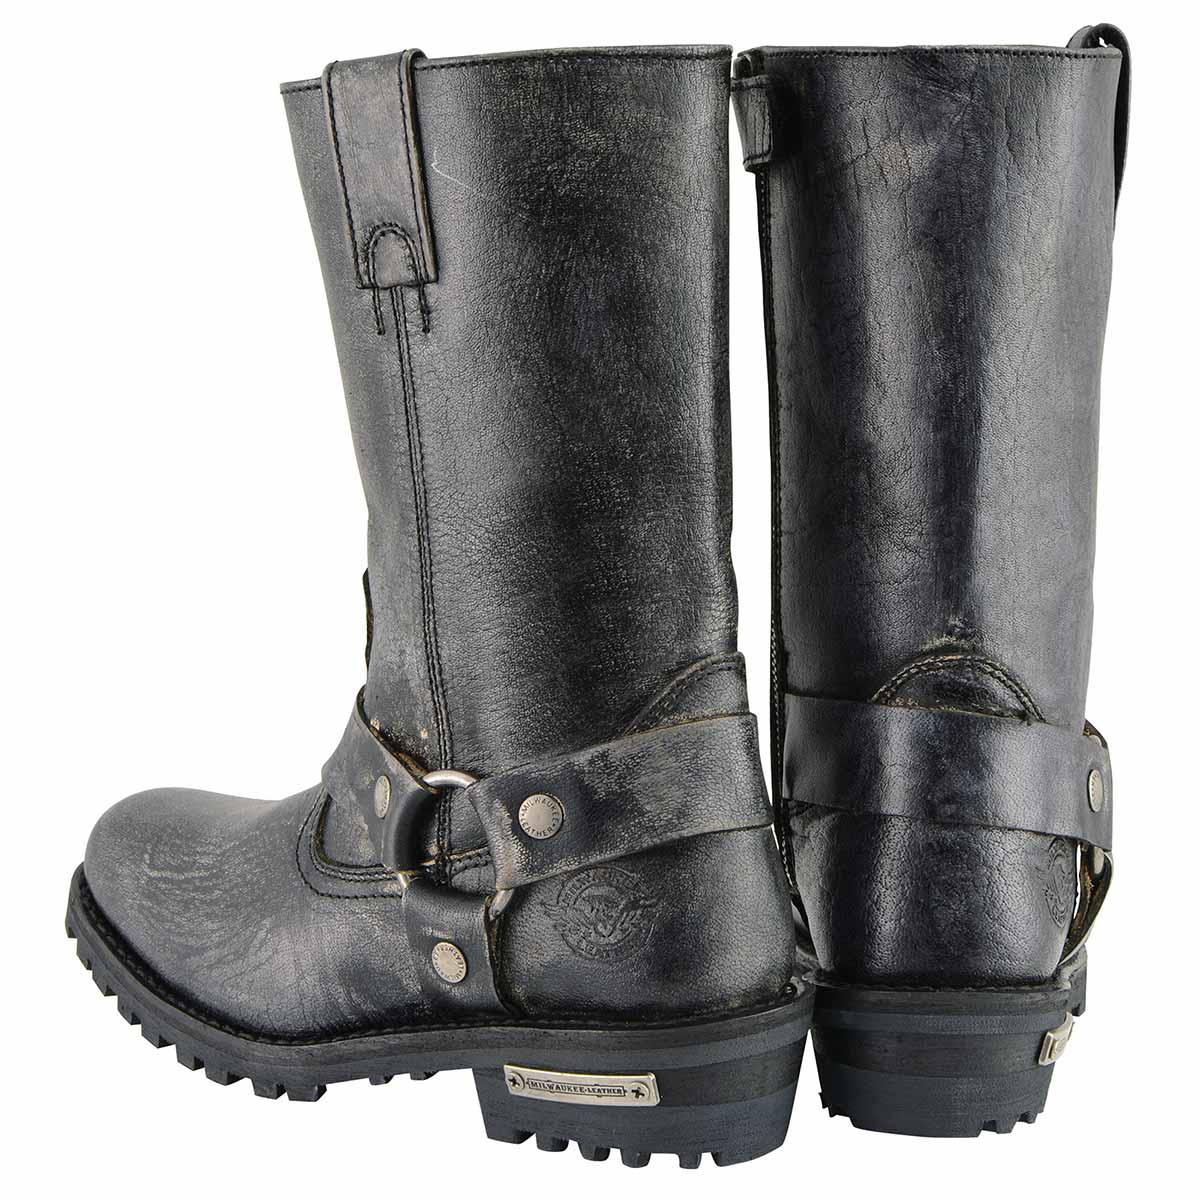 Men's Distressed Gray Leather 11-inch Classic Harness Square Toe Motorcycle Boots